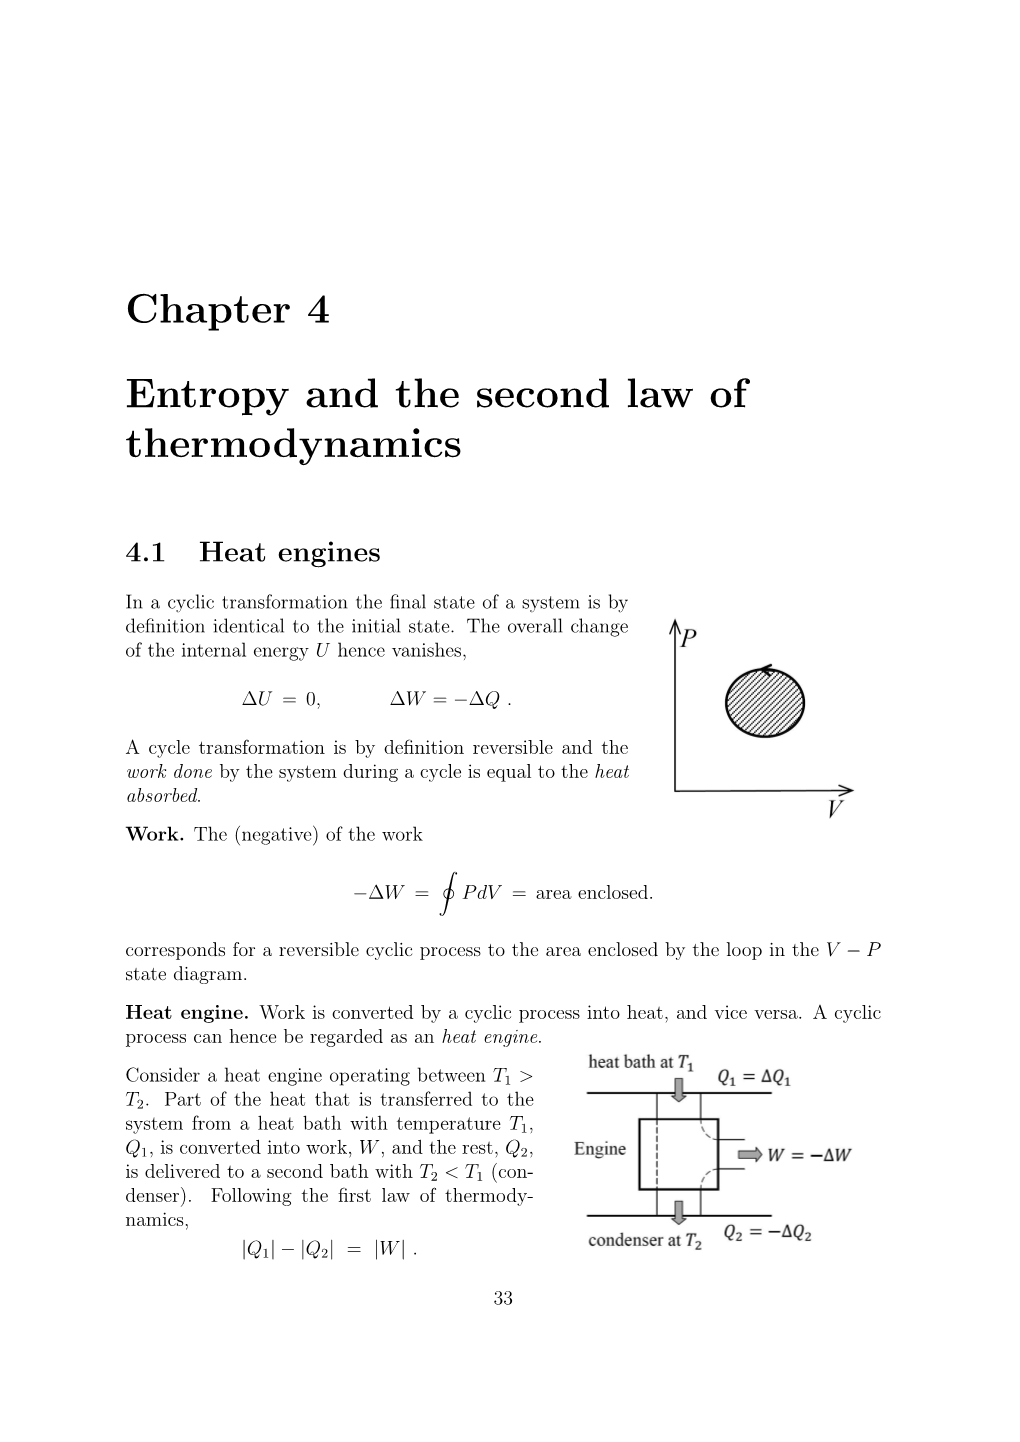 Chapter 4 Entropy and the Second Law of Thermodynamics